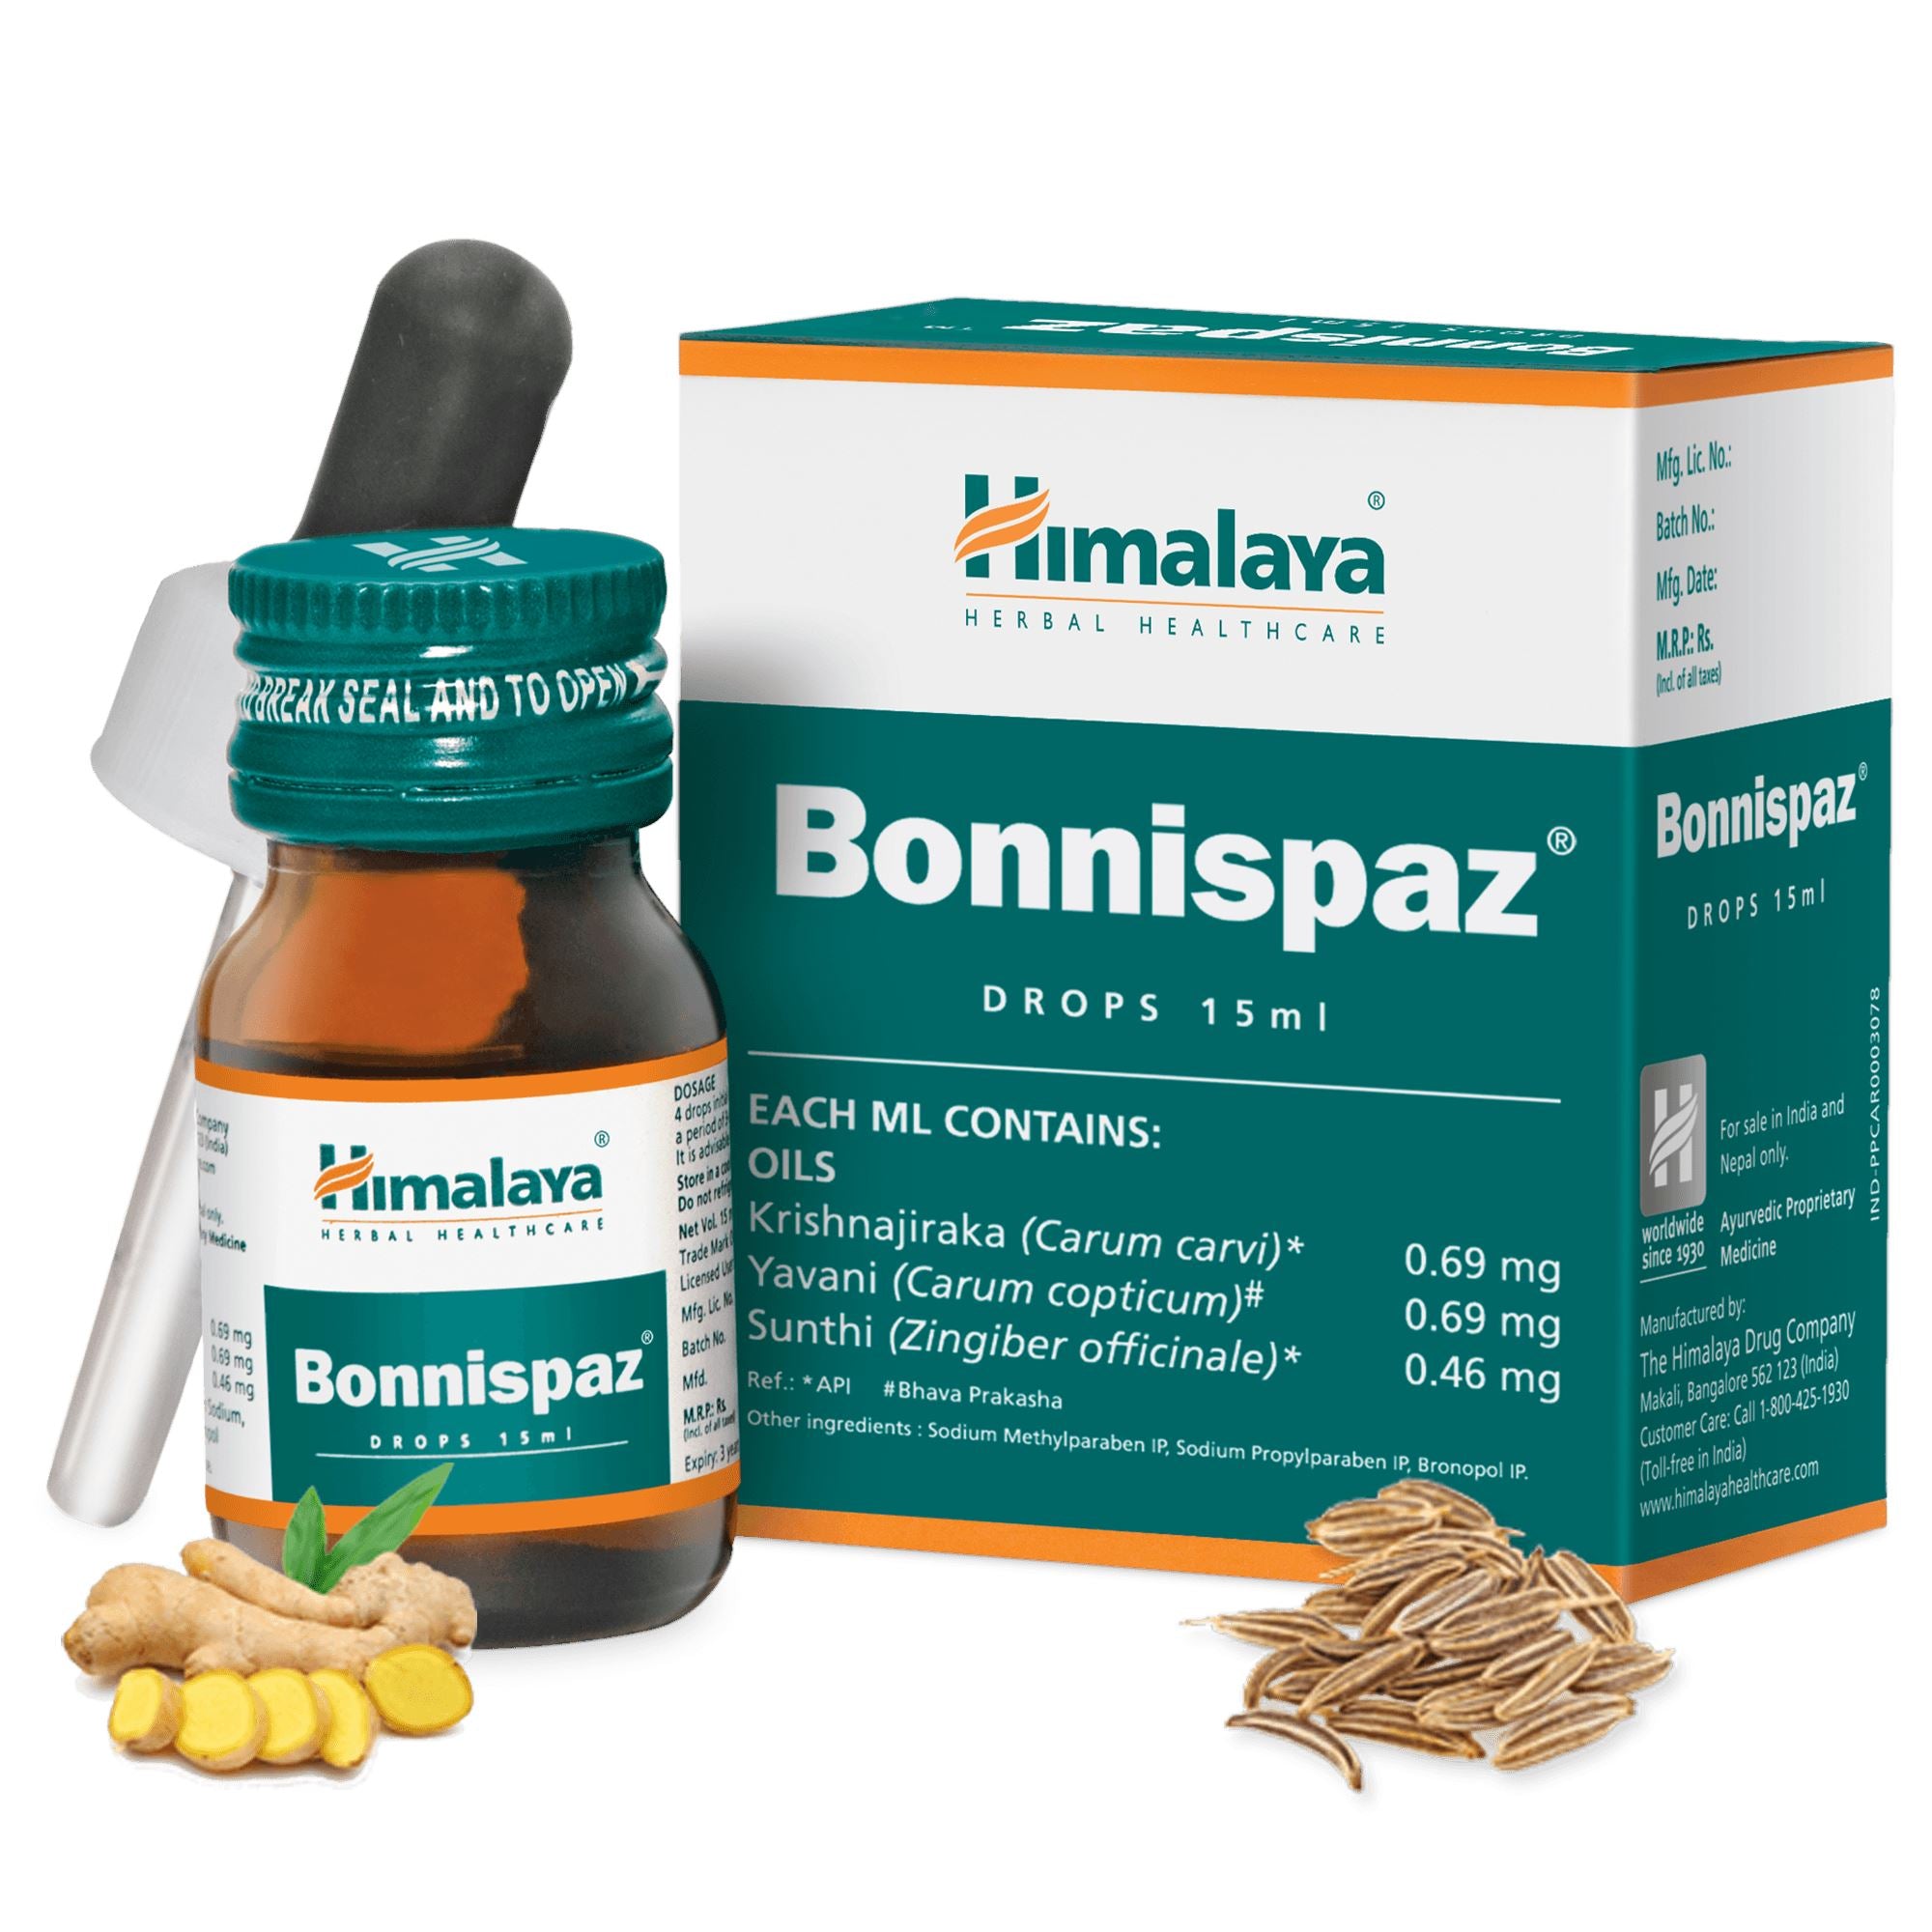 Himalaya Bonnispaz Drops - Changes colic to frolic in minutes